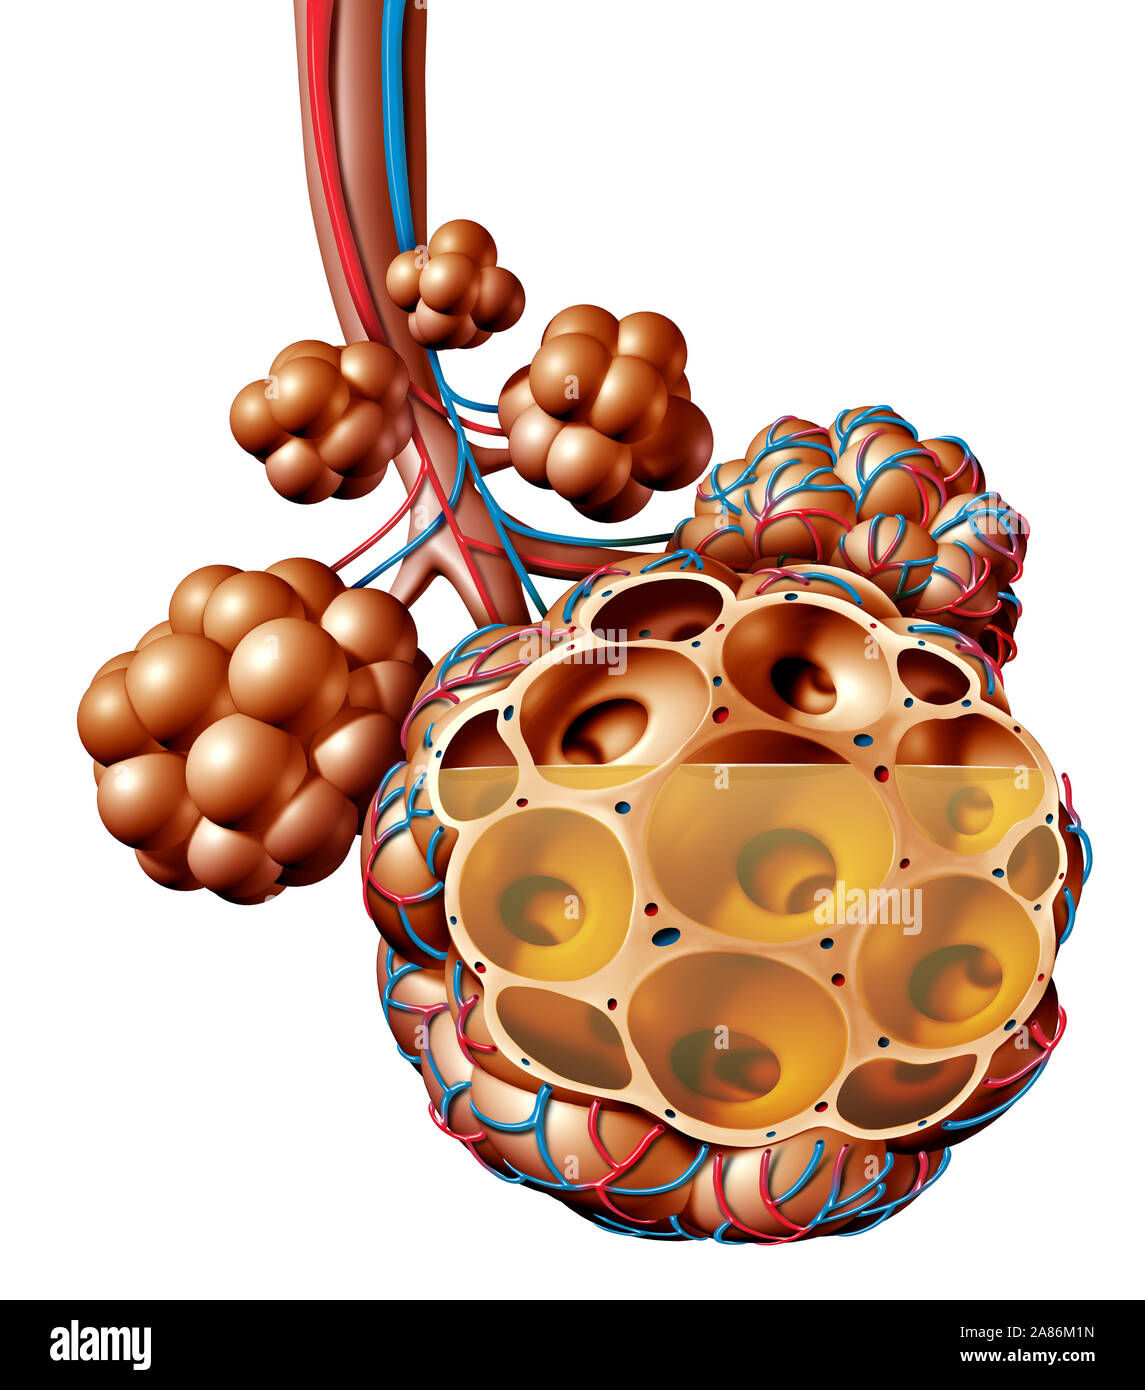 Pneumonia and Pulmonary alveoli with fluid or alveolus inflammation anatomy diagram as a medical concept of a lung anatomy and respiratory. Stock Photo